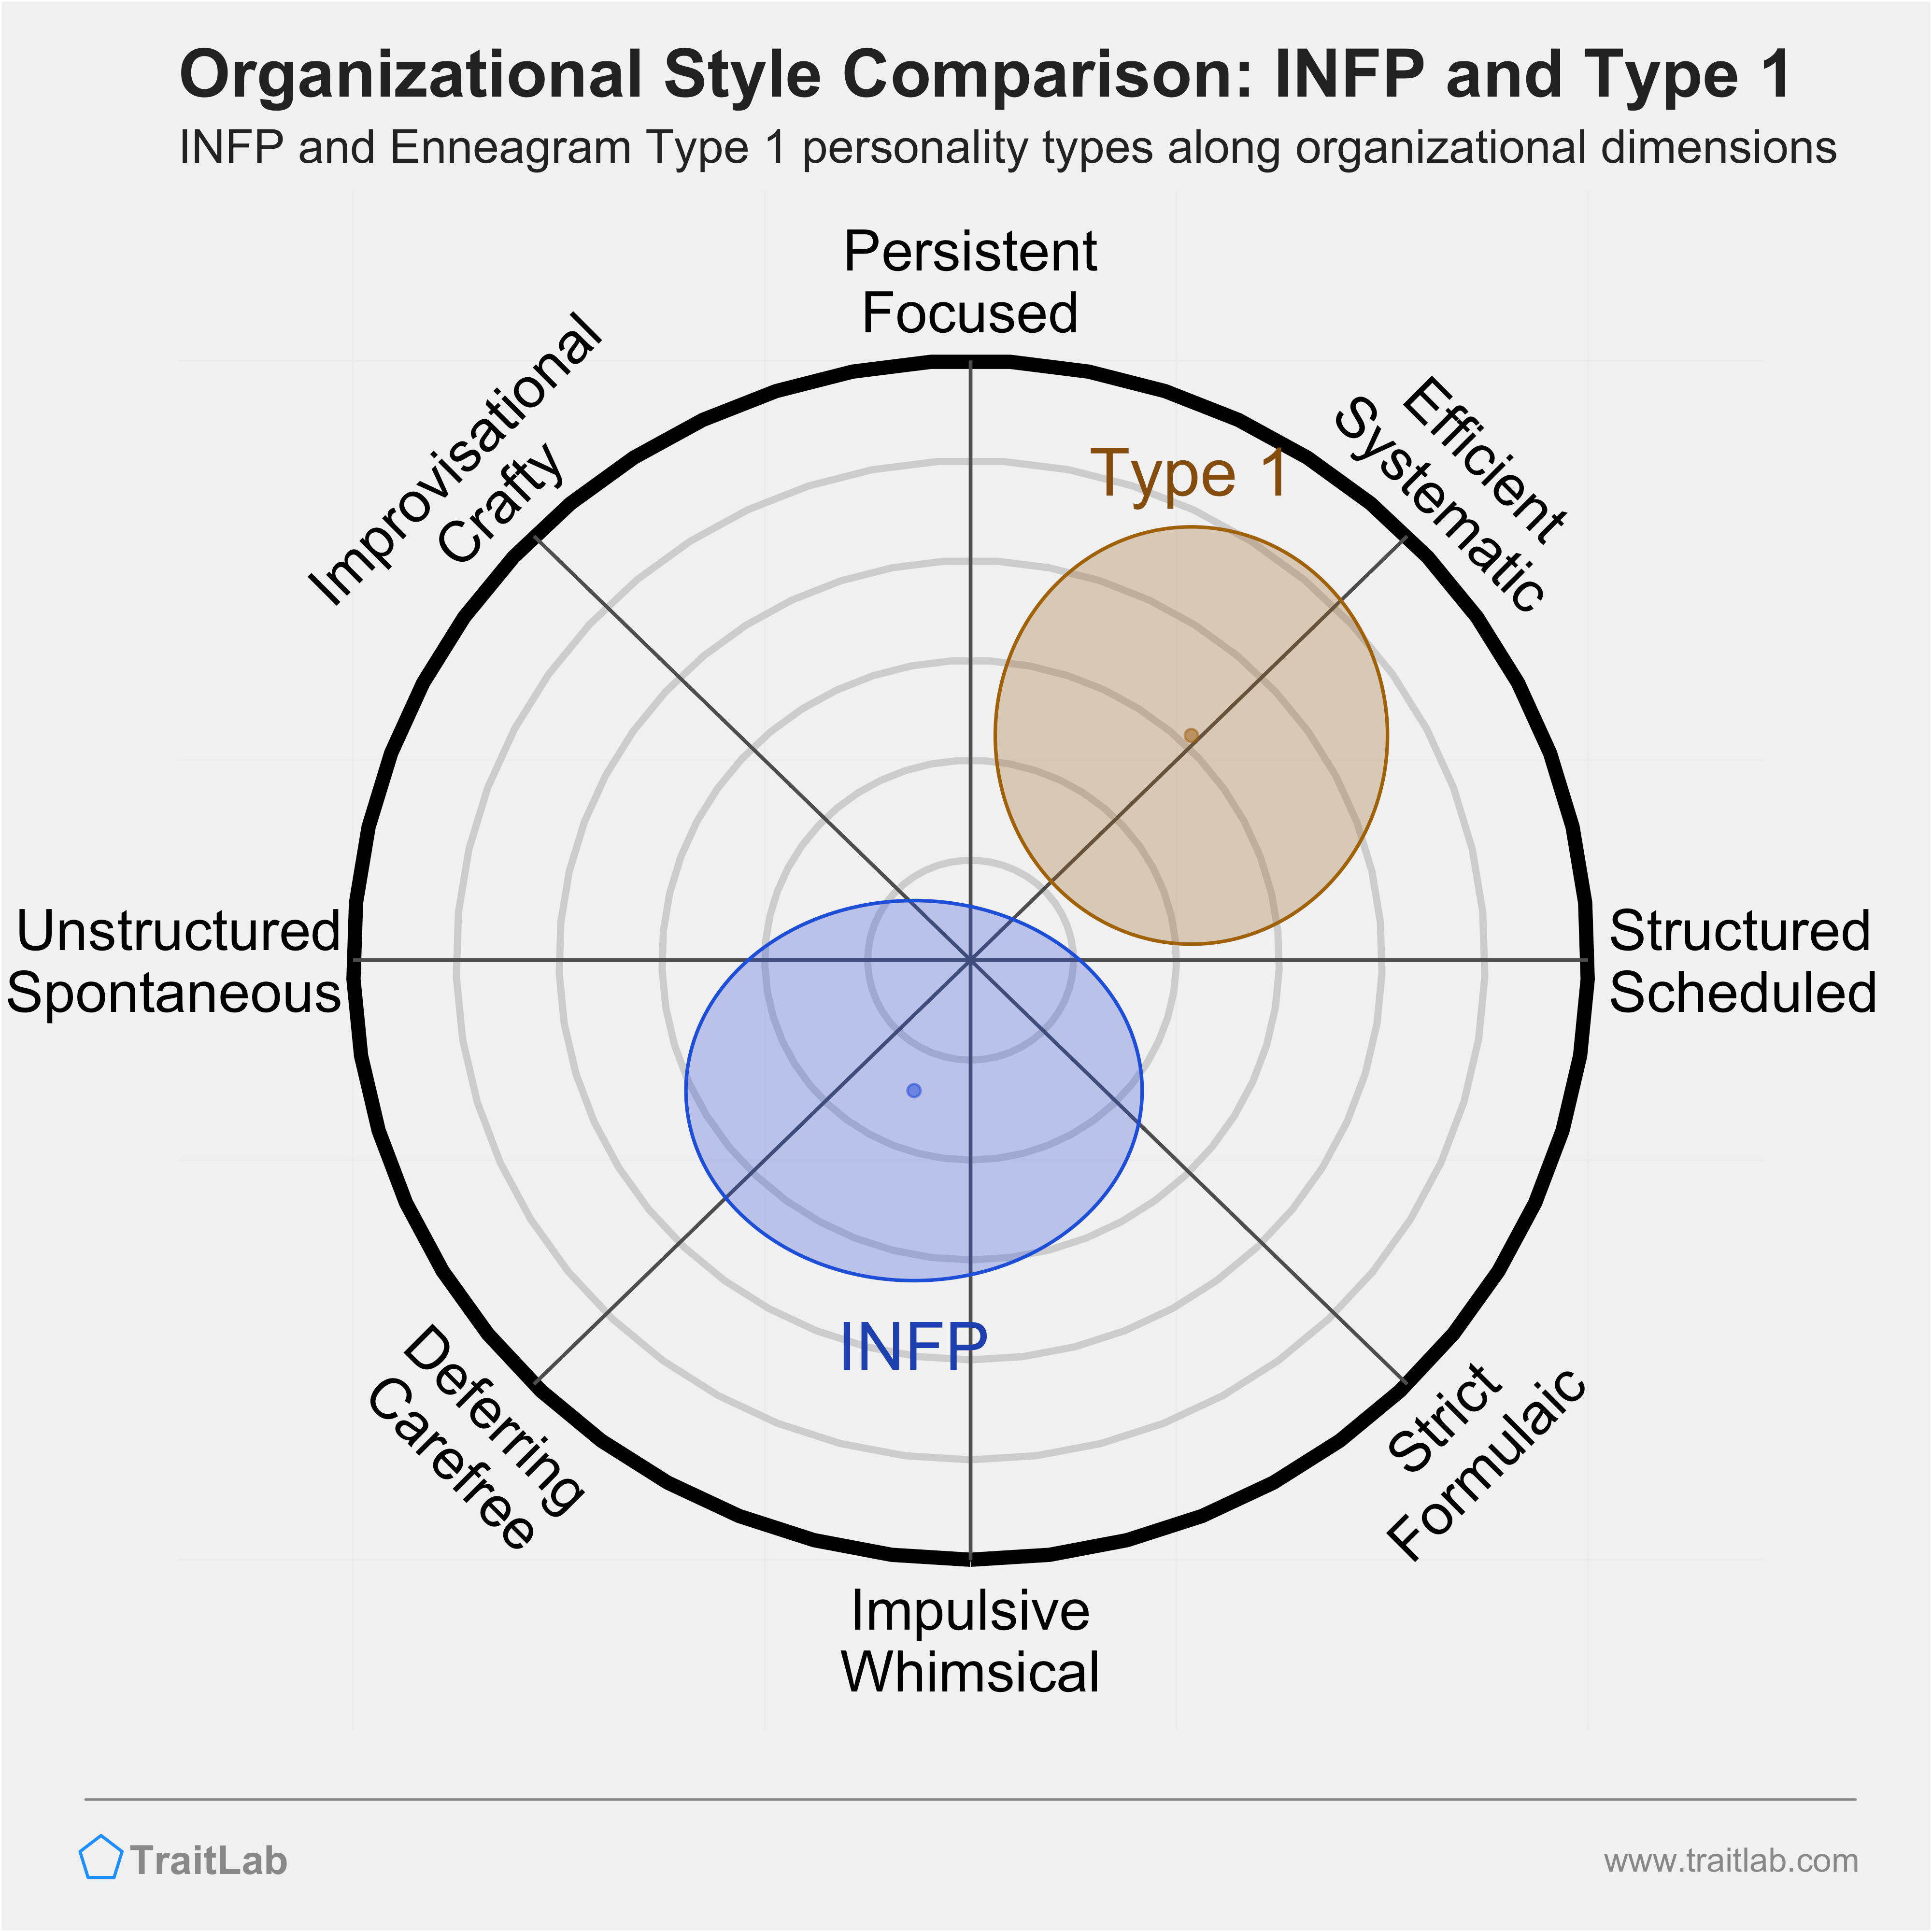 INFP and Type 1 comparison across organizational dimensions